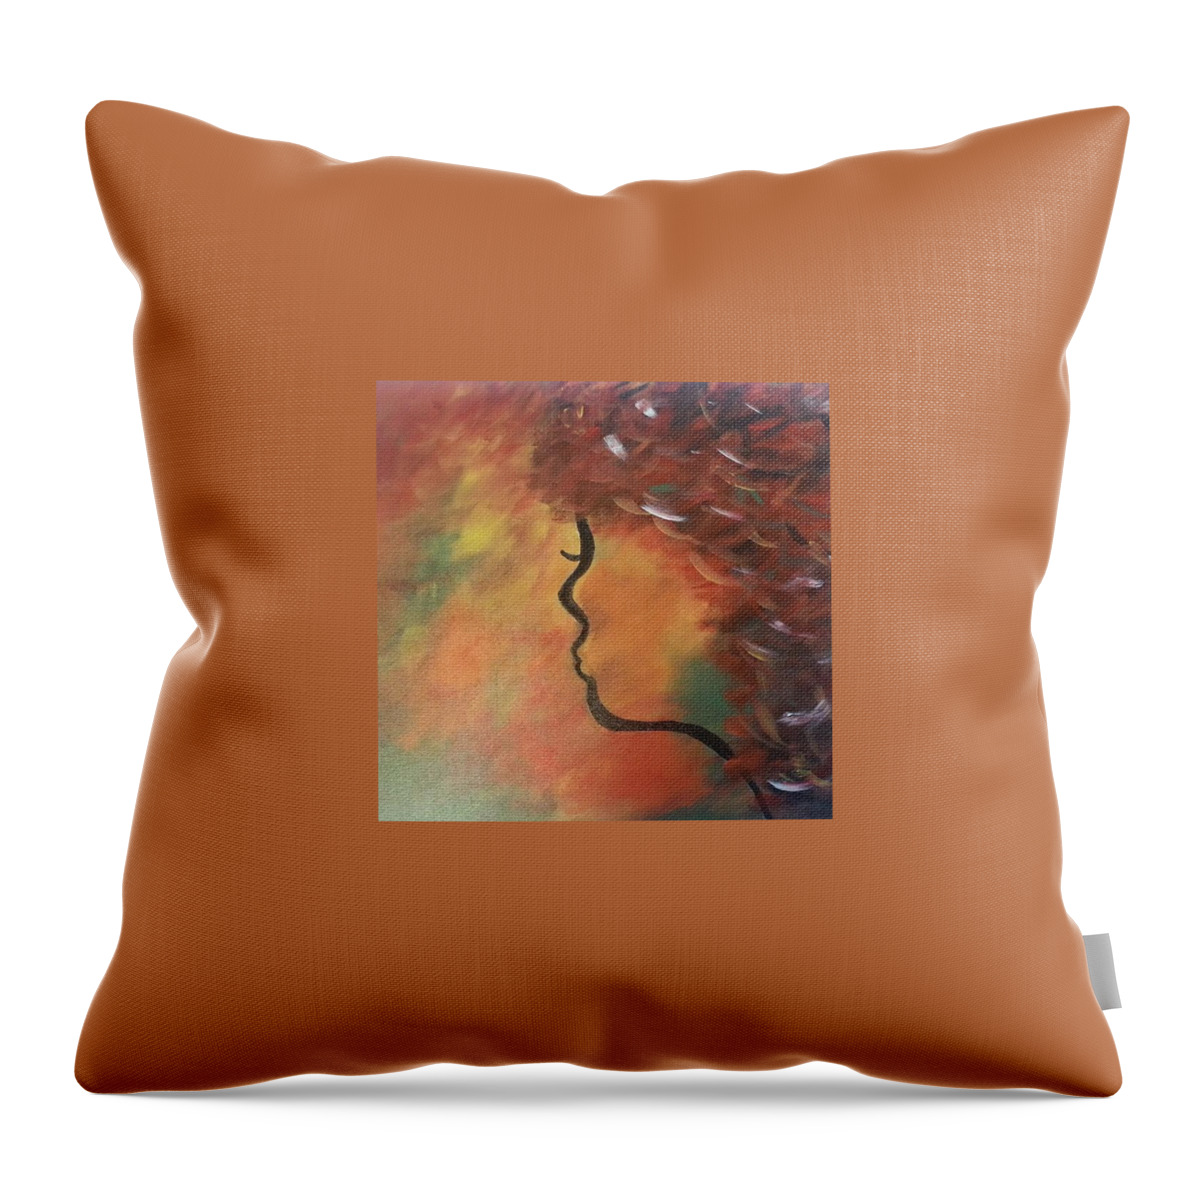 Woman Throw Pillow featuring the photograph Woman by Ty Mabry